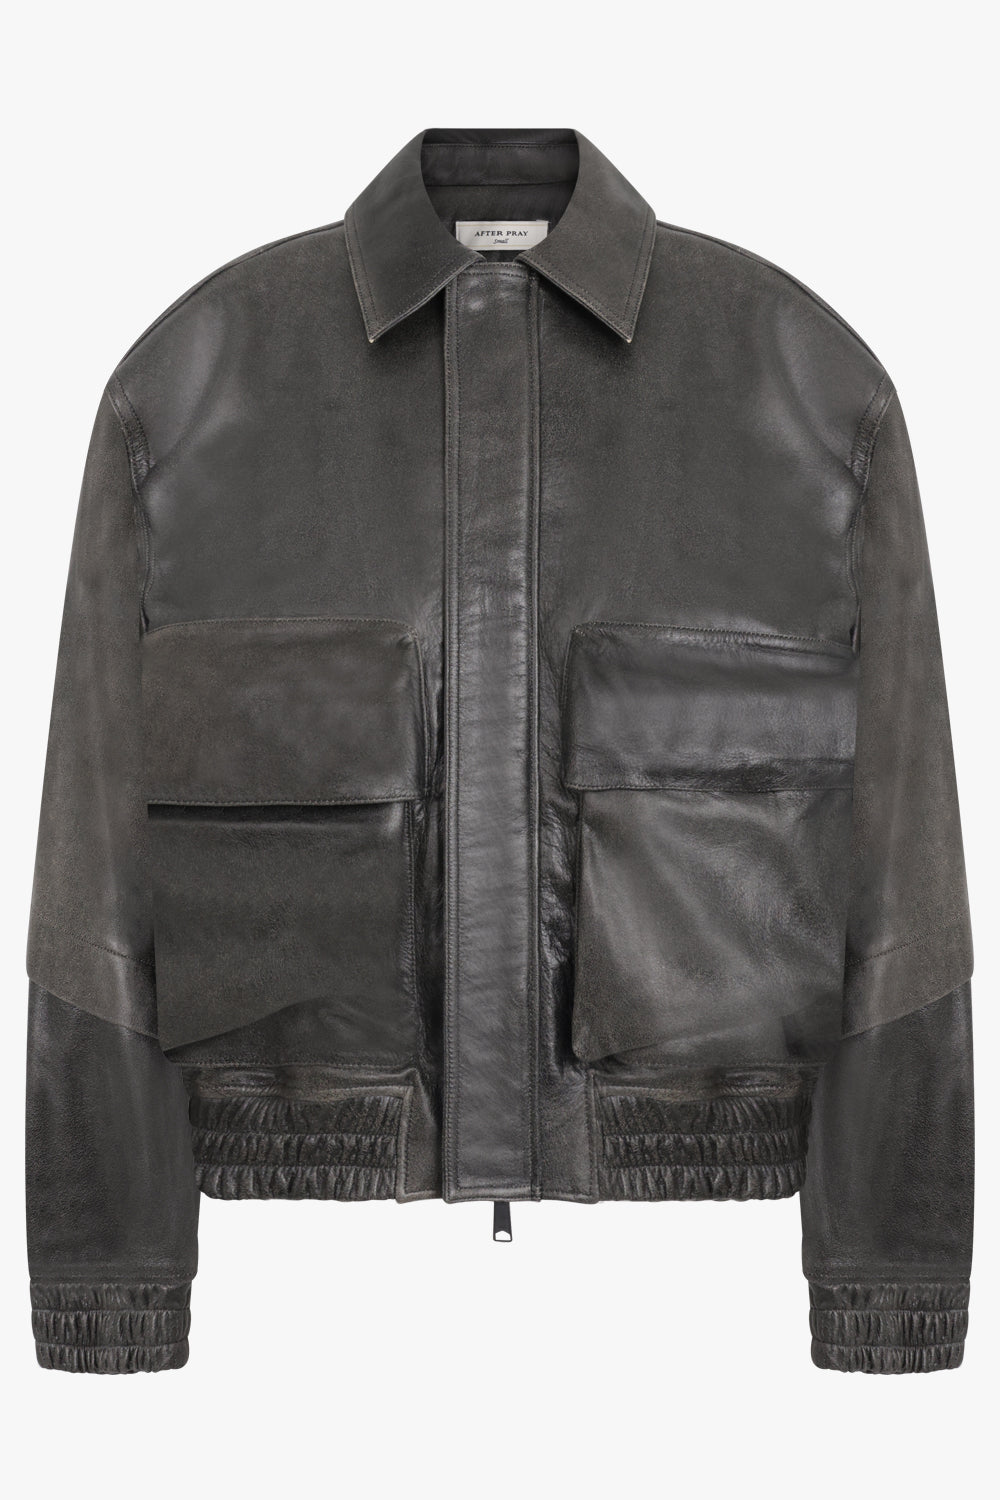 AFTER PRAY Unclassified OVERSIZED LEATHER BLOUSON | BLACK